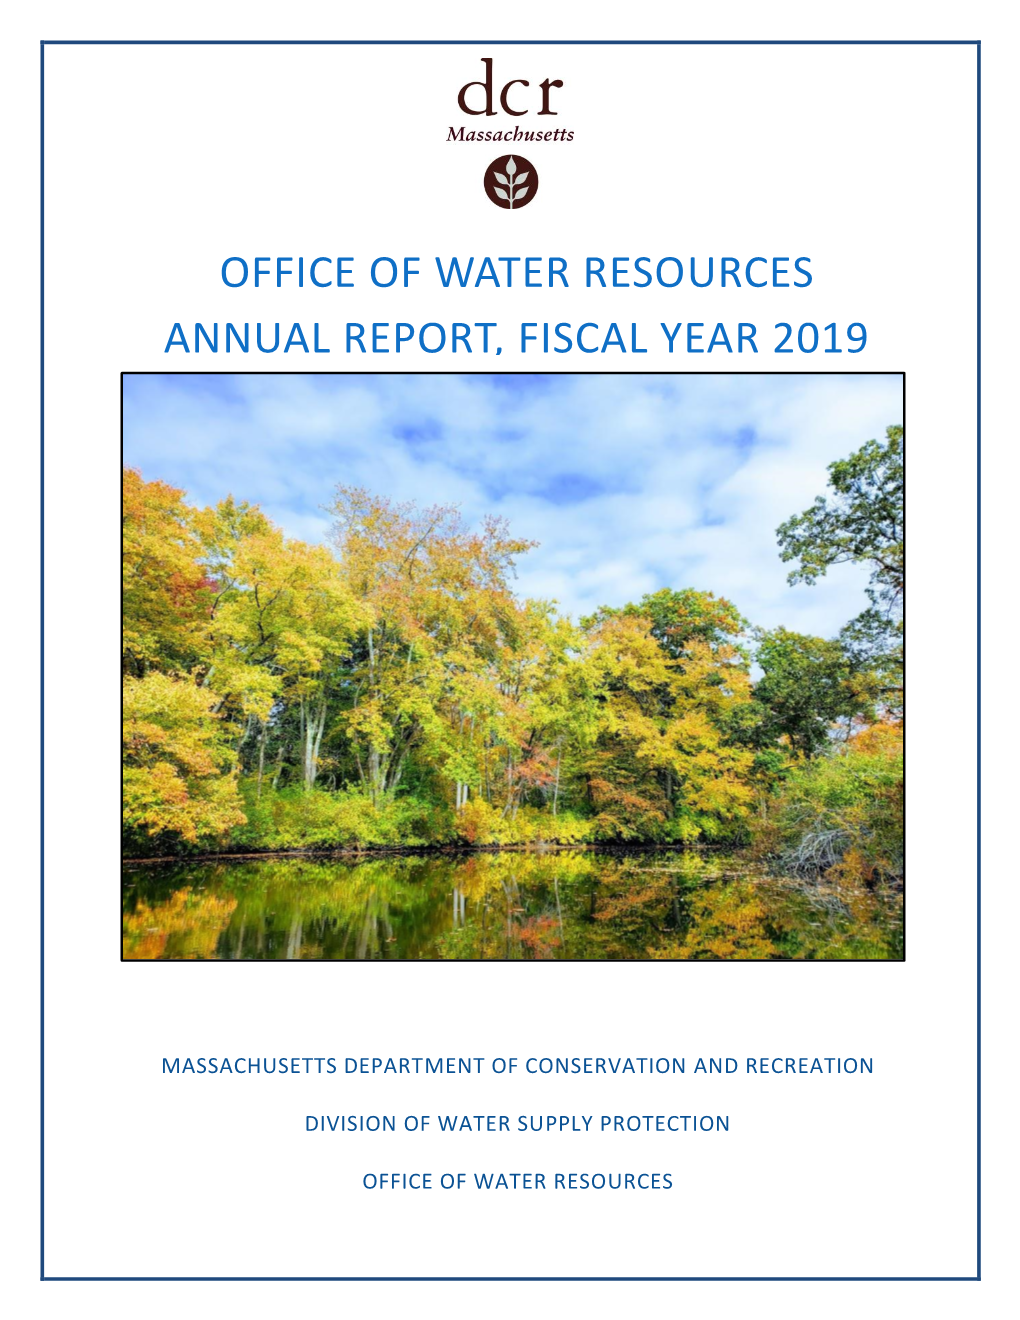 Office of Water Resources Annual Report, Fiscal Year 2019